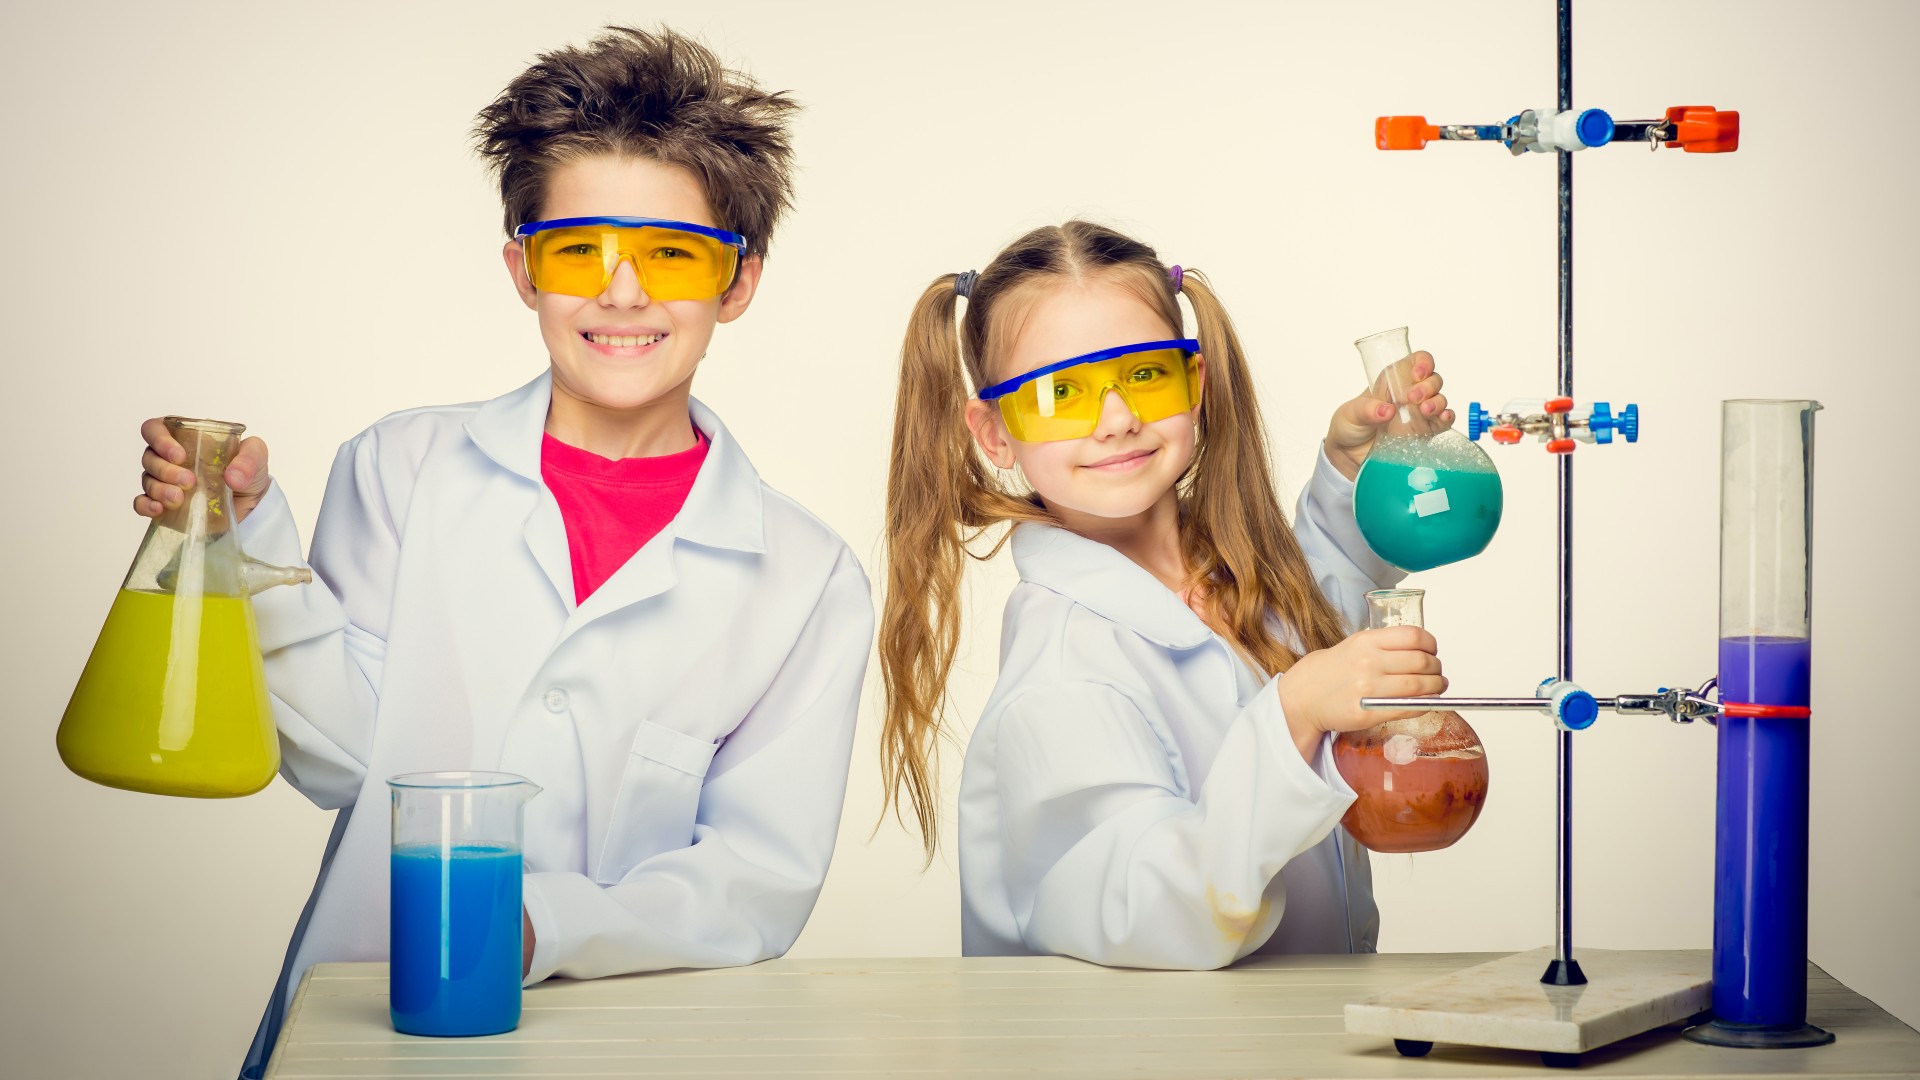 6-in-1 Science Kit for Kids - Chemistry Experiments, Crystal Growing, Fizzy  Reactions, and More - DIY STEM Educational Learning Science Kits - Ages